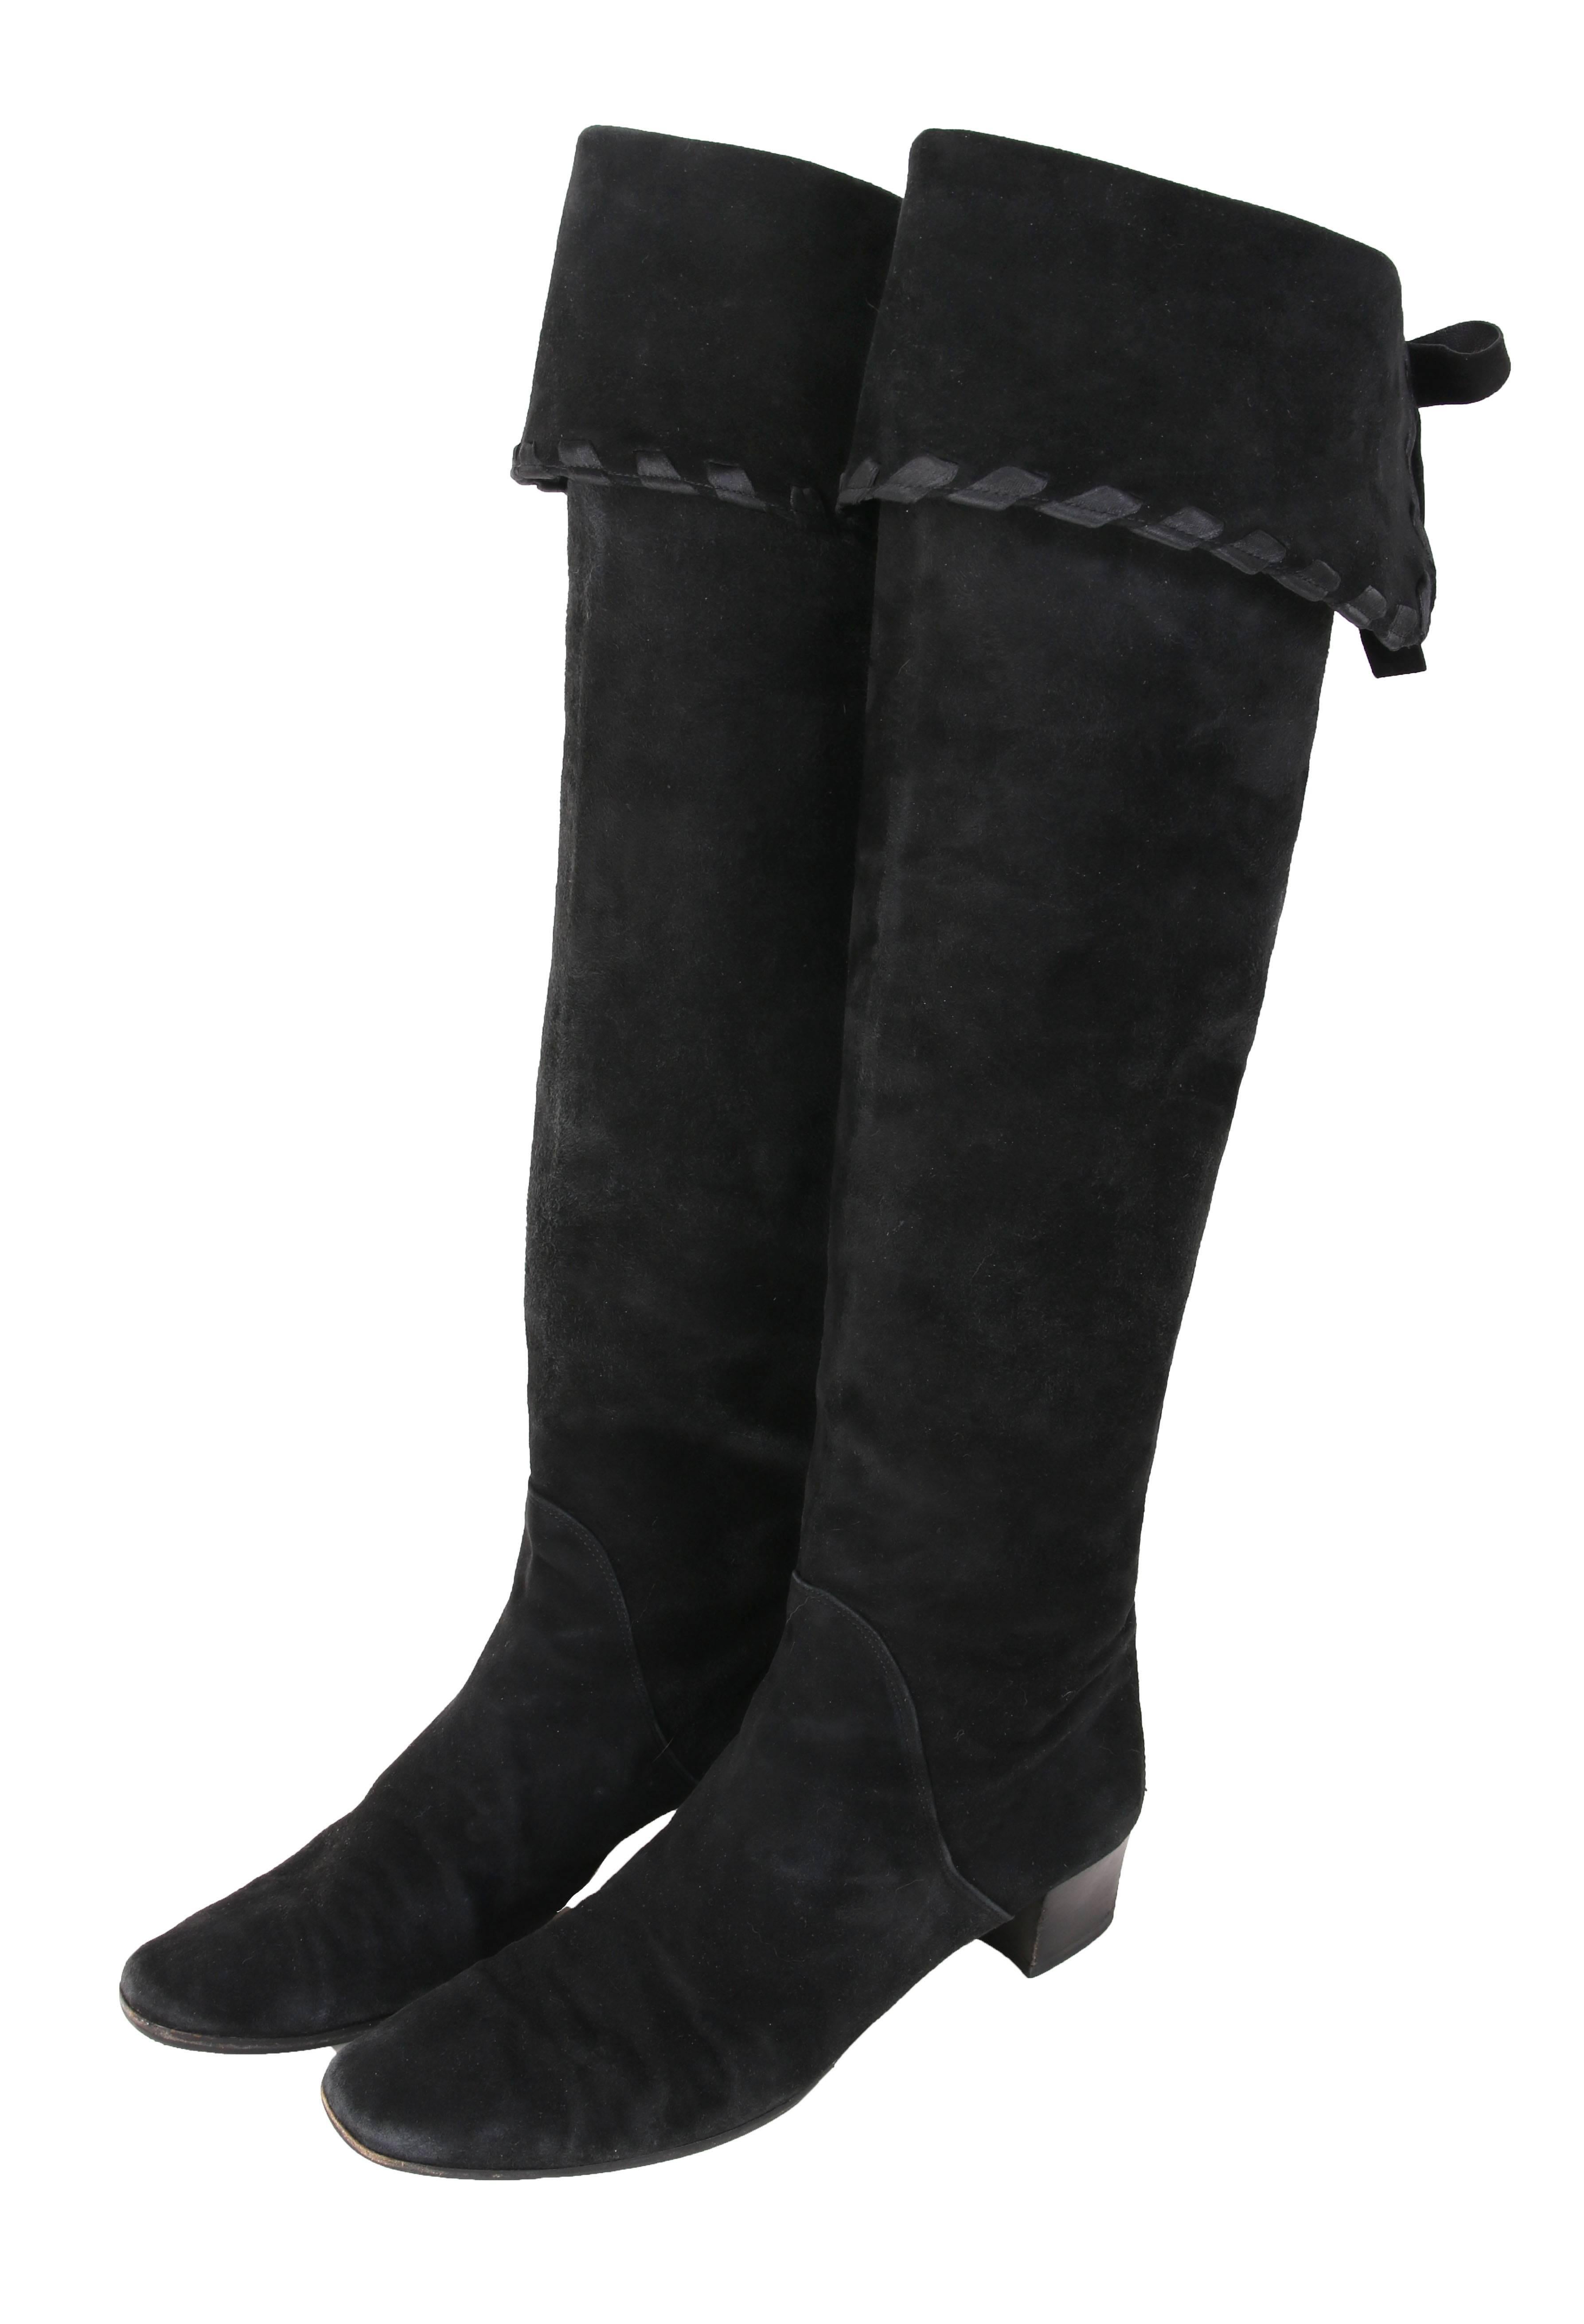 Vintage Yves Saint Laurent YSL black suede boots that can be worn as either knee-high or thigh-high. Top of boot is finished with satin ribbon and decorative leather ties at back. The boots are stamped Yves Saint Laurent at interior at the foot pad